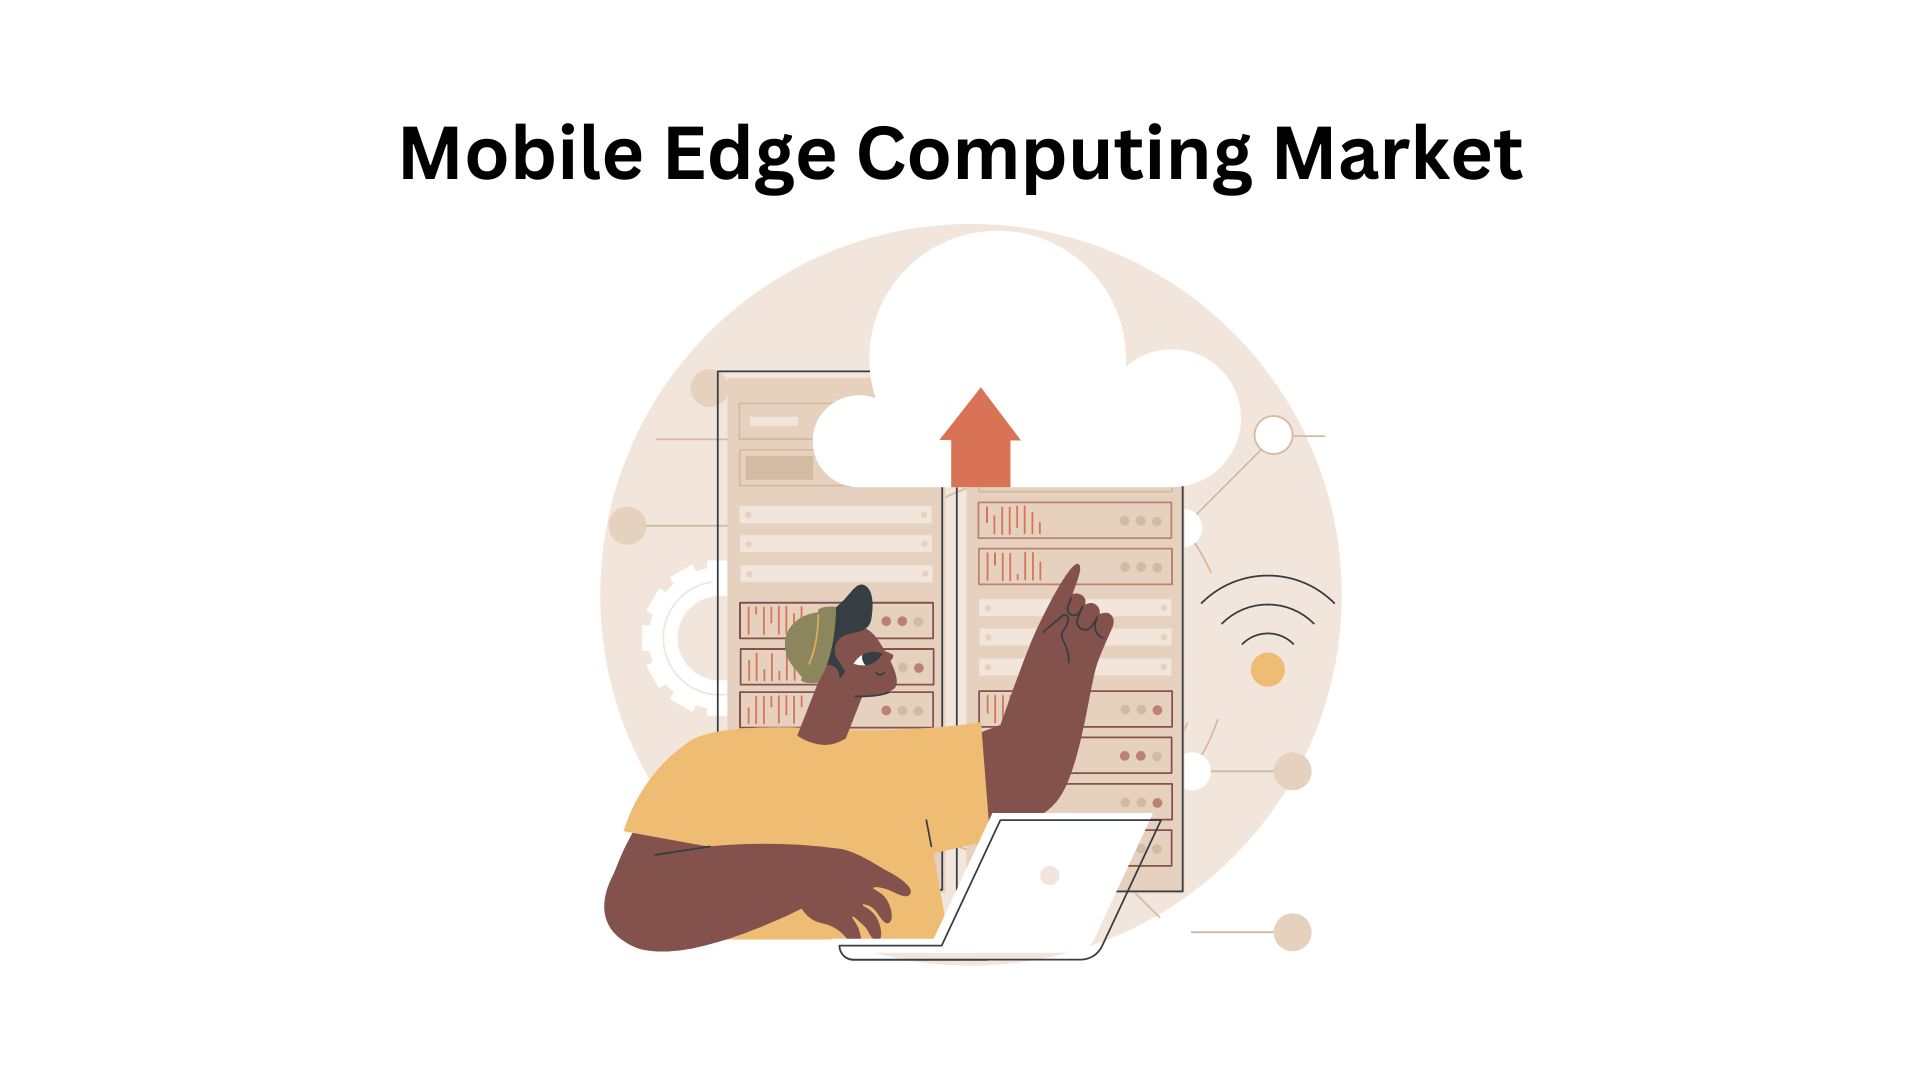 Mobile Edge Computing Market is expected to reach USD 385.46 Bn by 2033